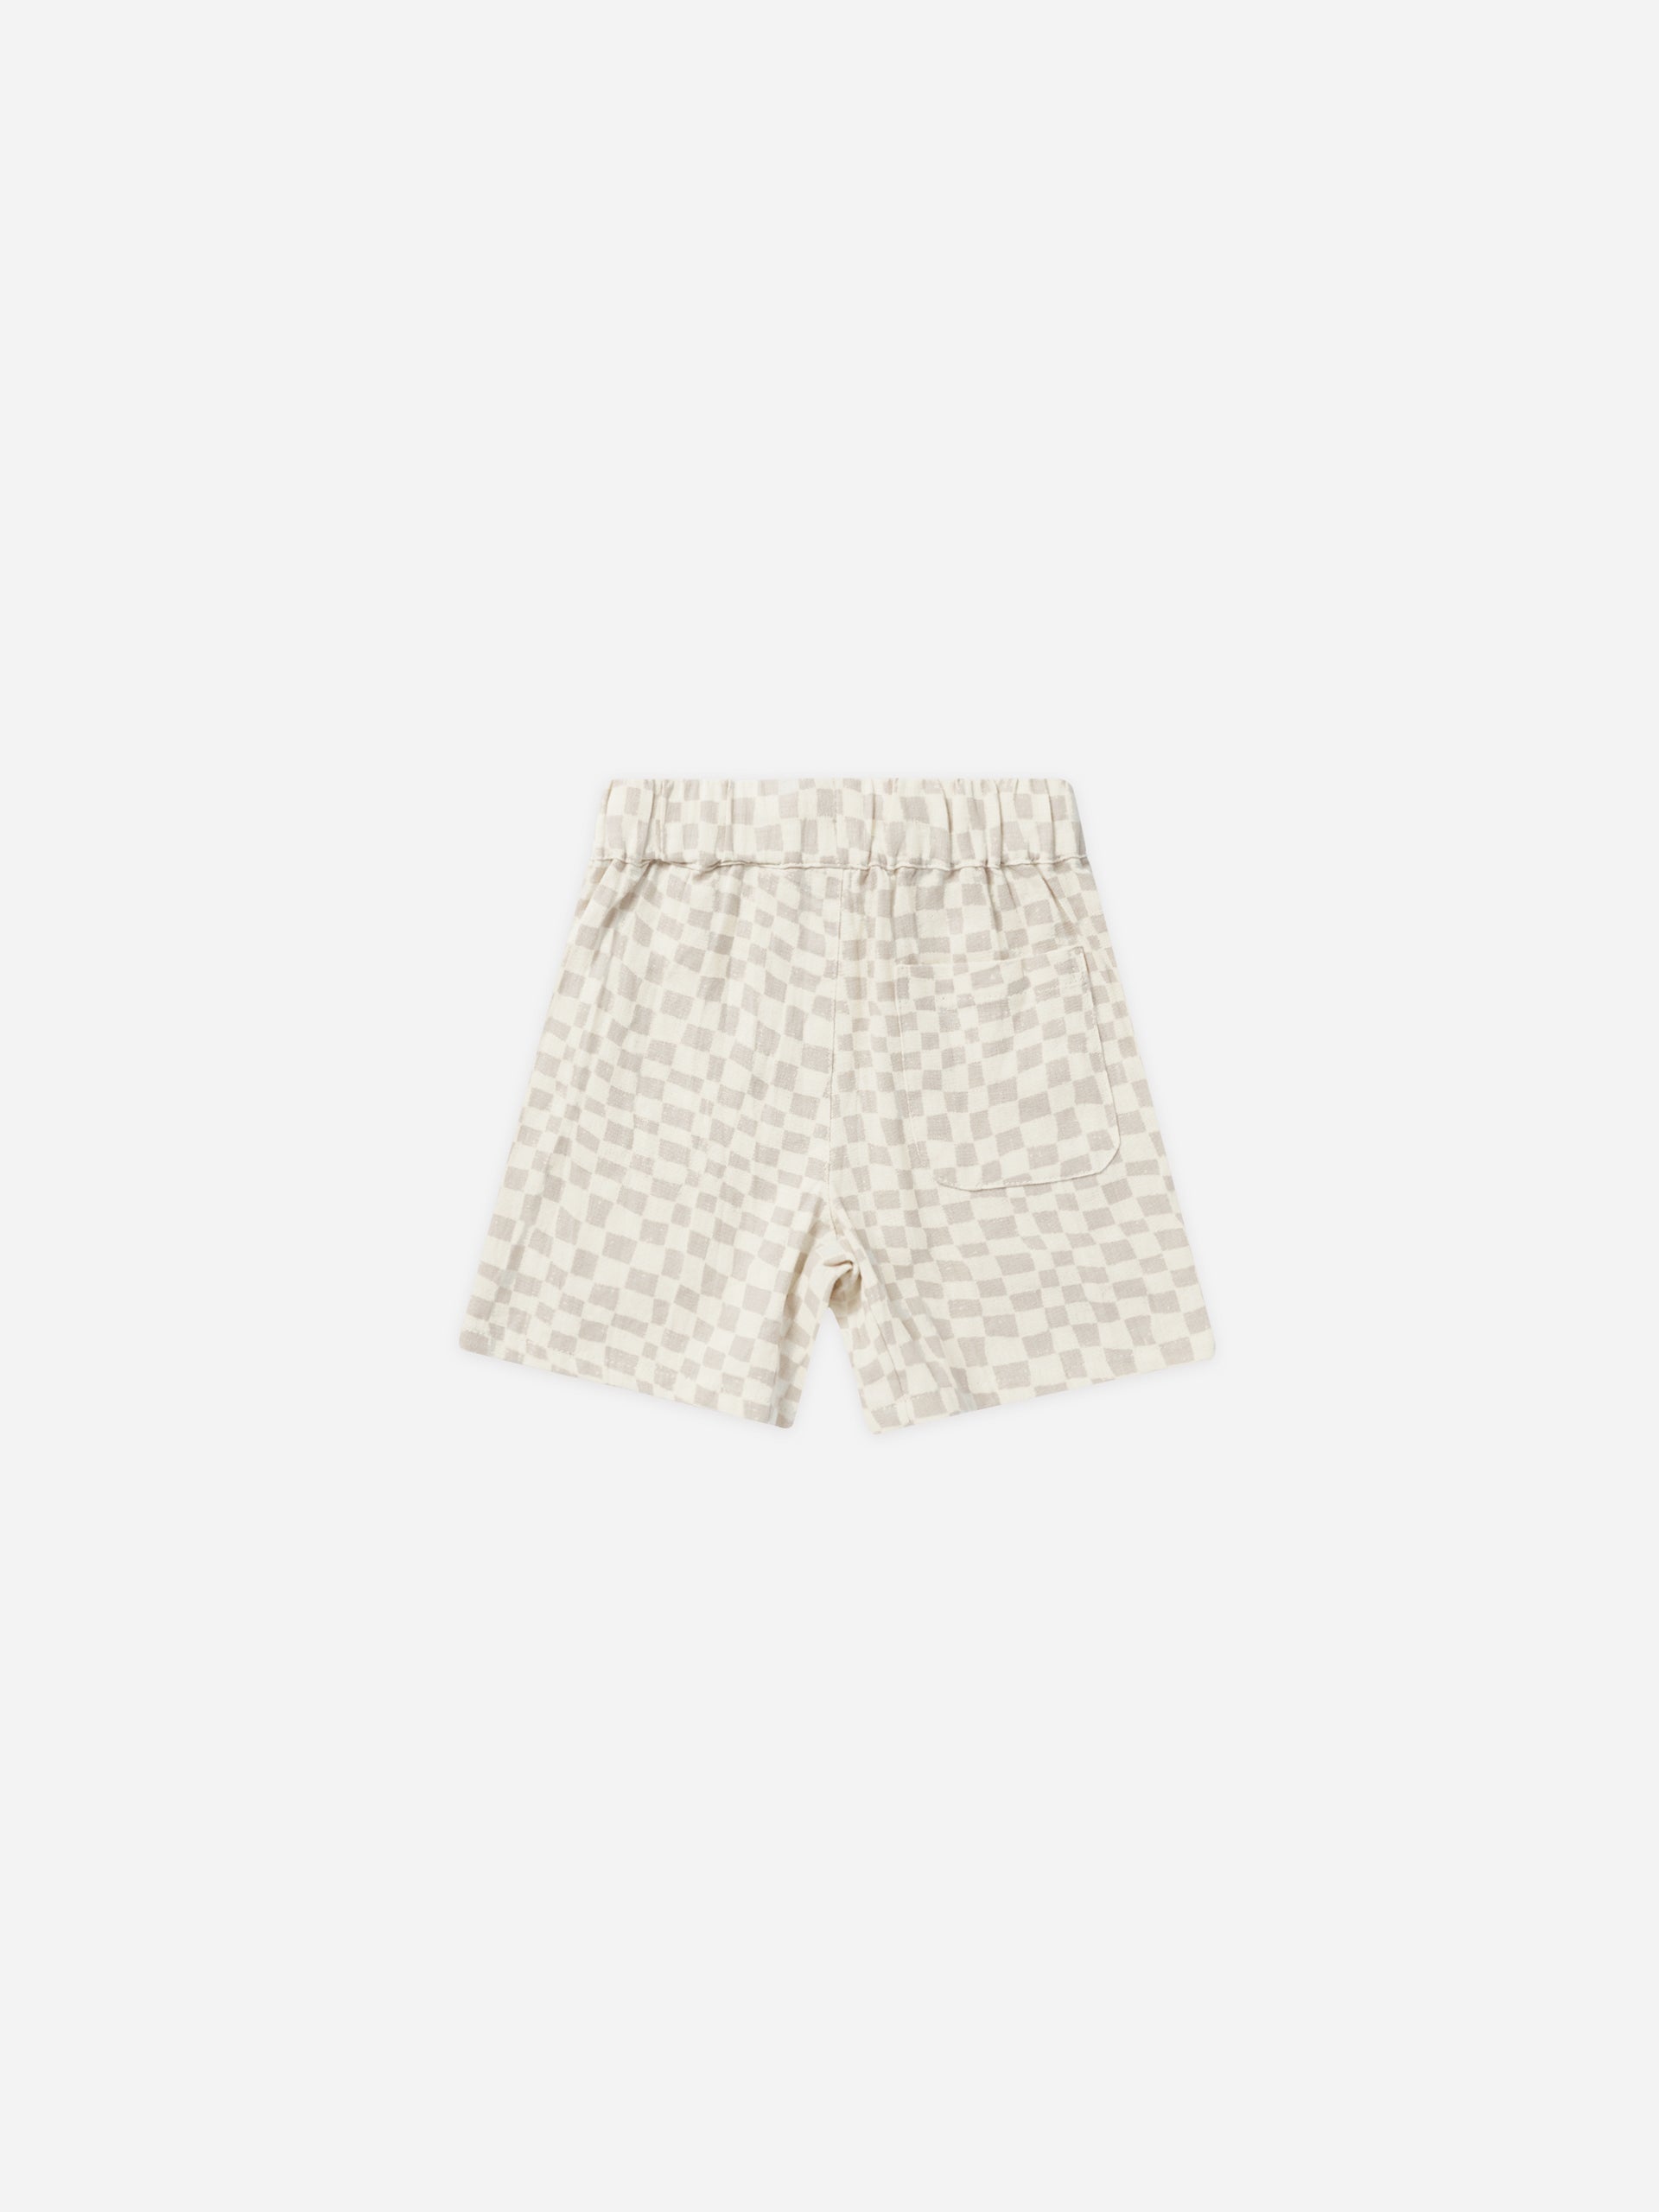 Bermuda Short || Dove Check - Rylee + Cru | Kids Clothes | Trendy Baby Clothes | Modern Infant Outfits |